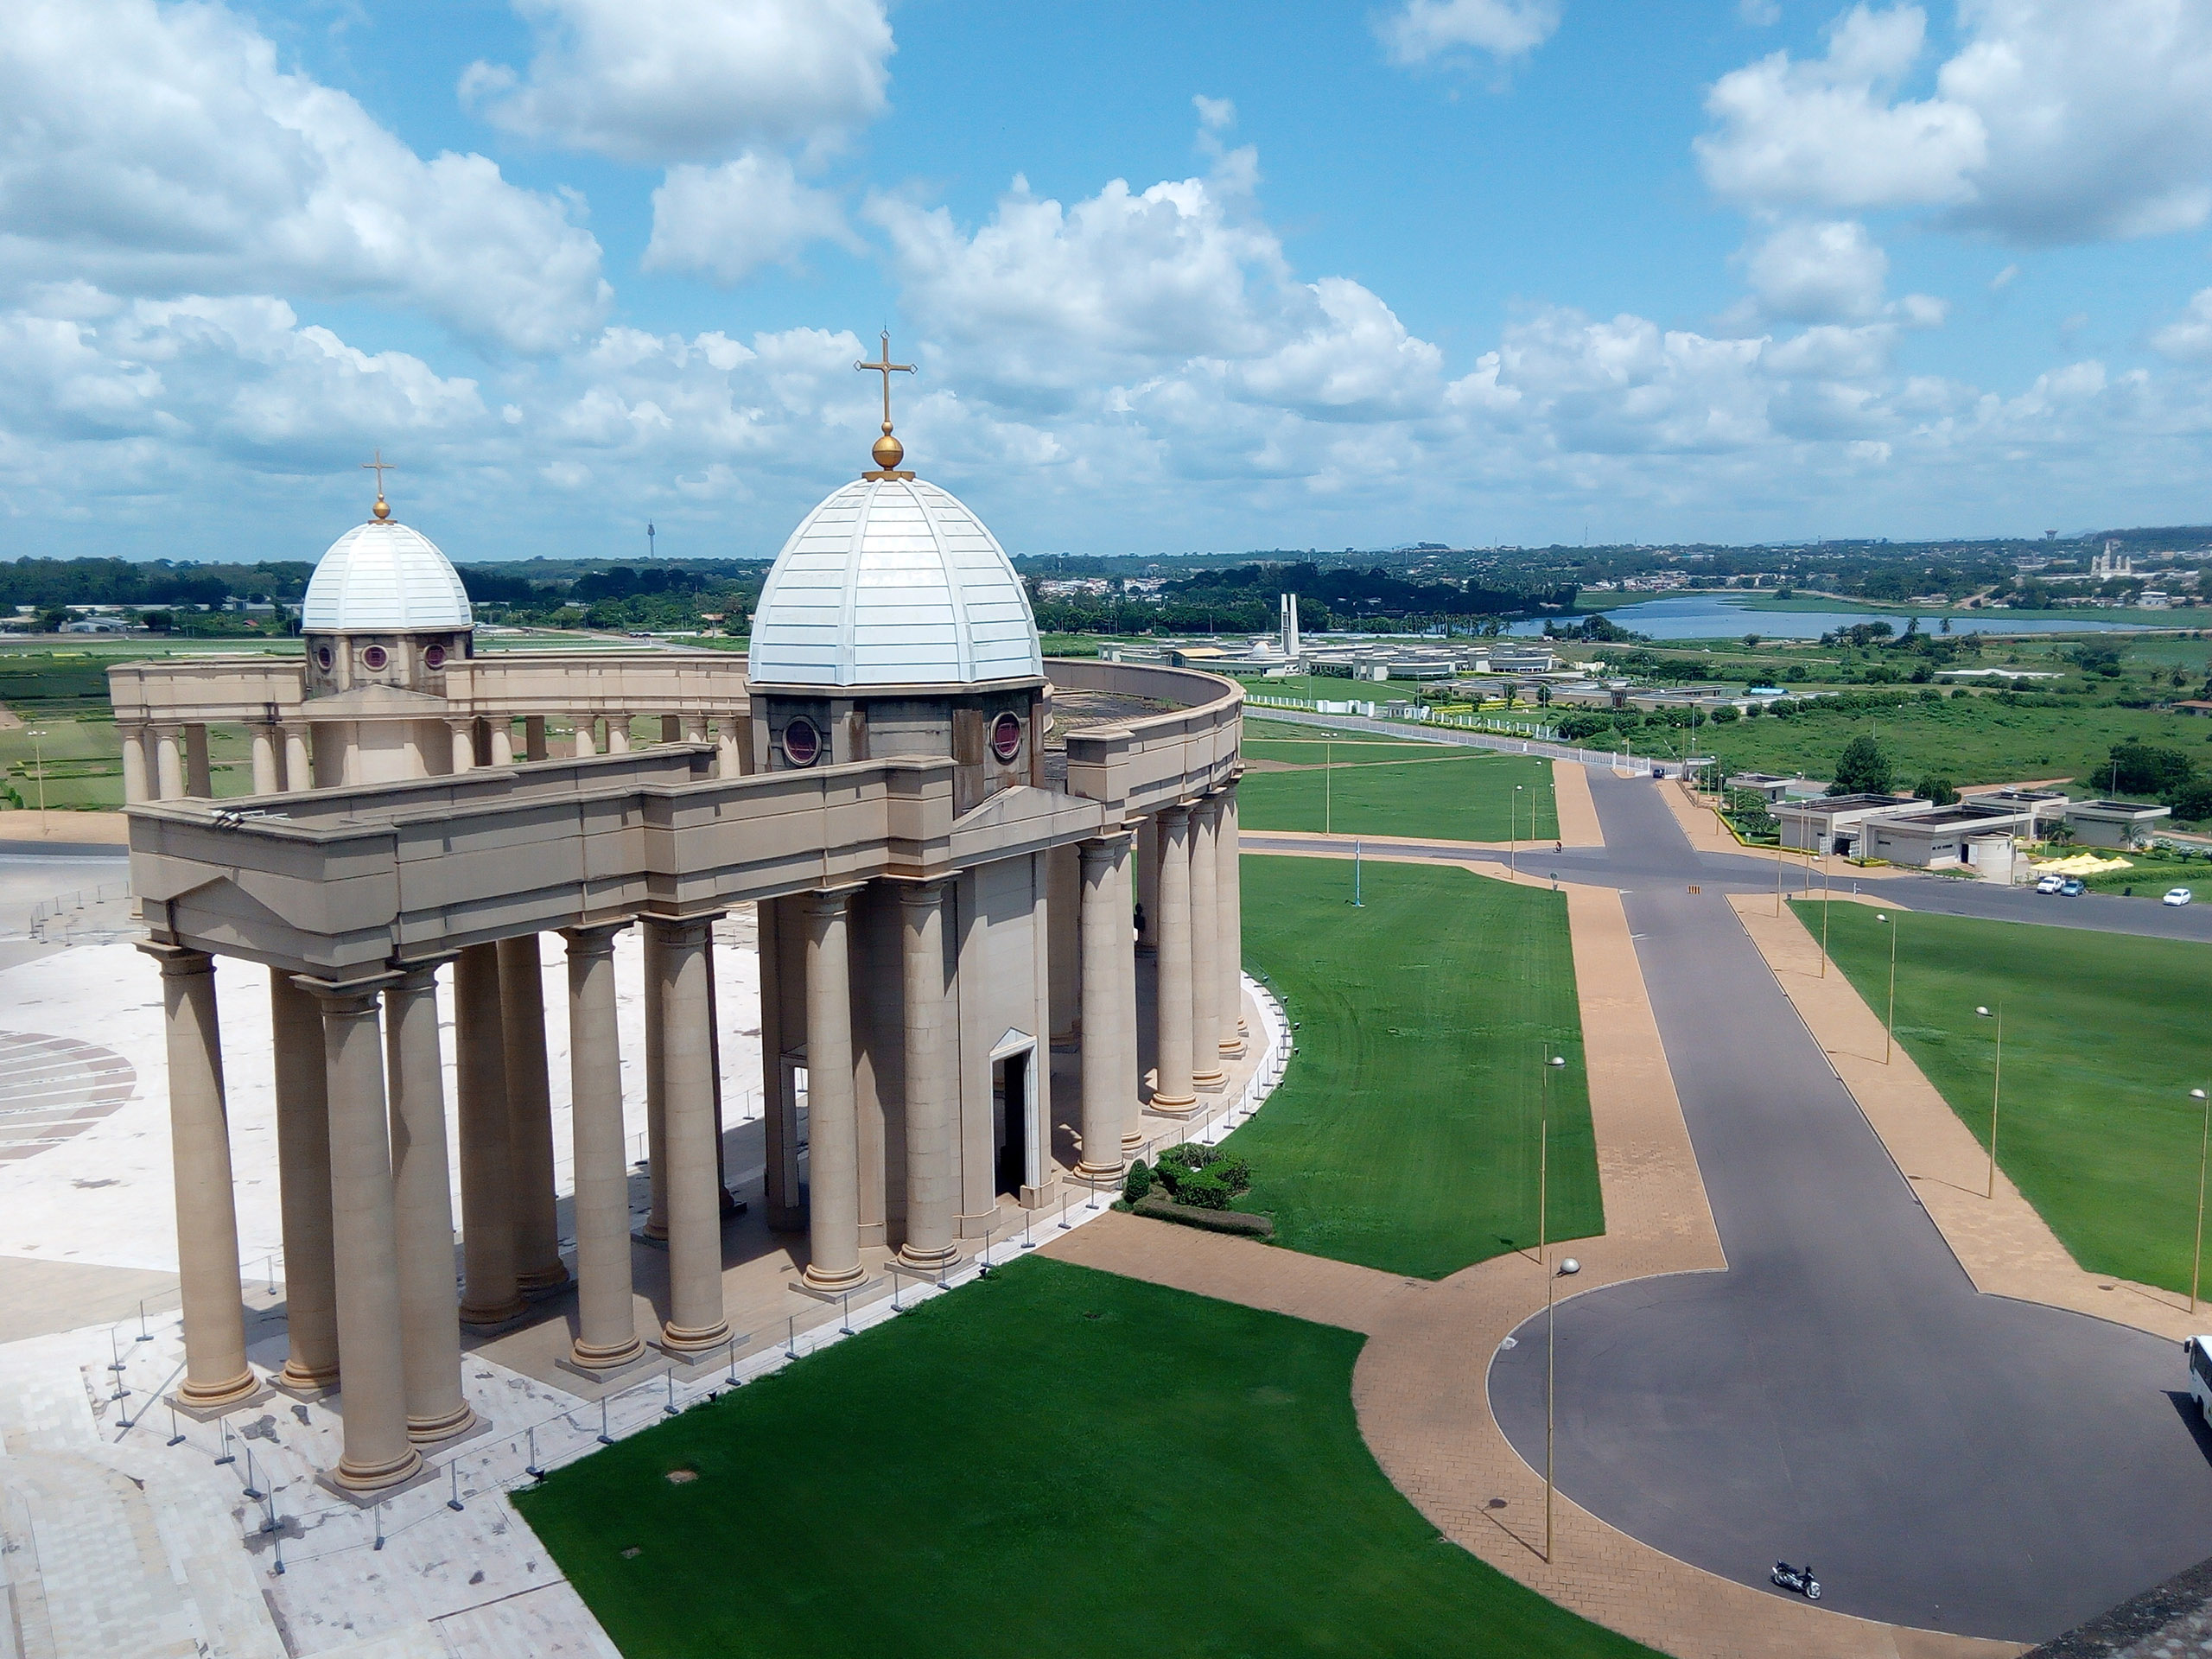 Basilica of Our Lady of Peace in Yamoussoukro in Côte d'Ivoire visited in October 2018